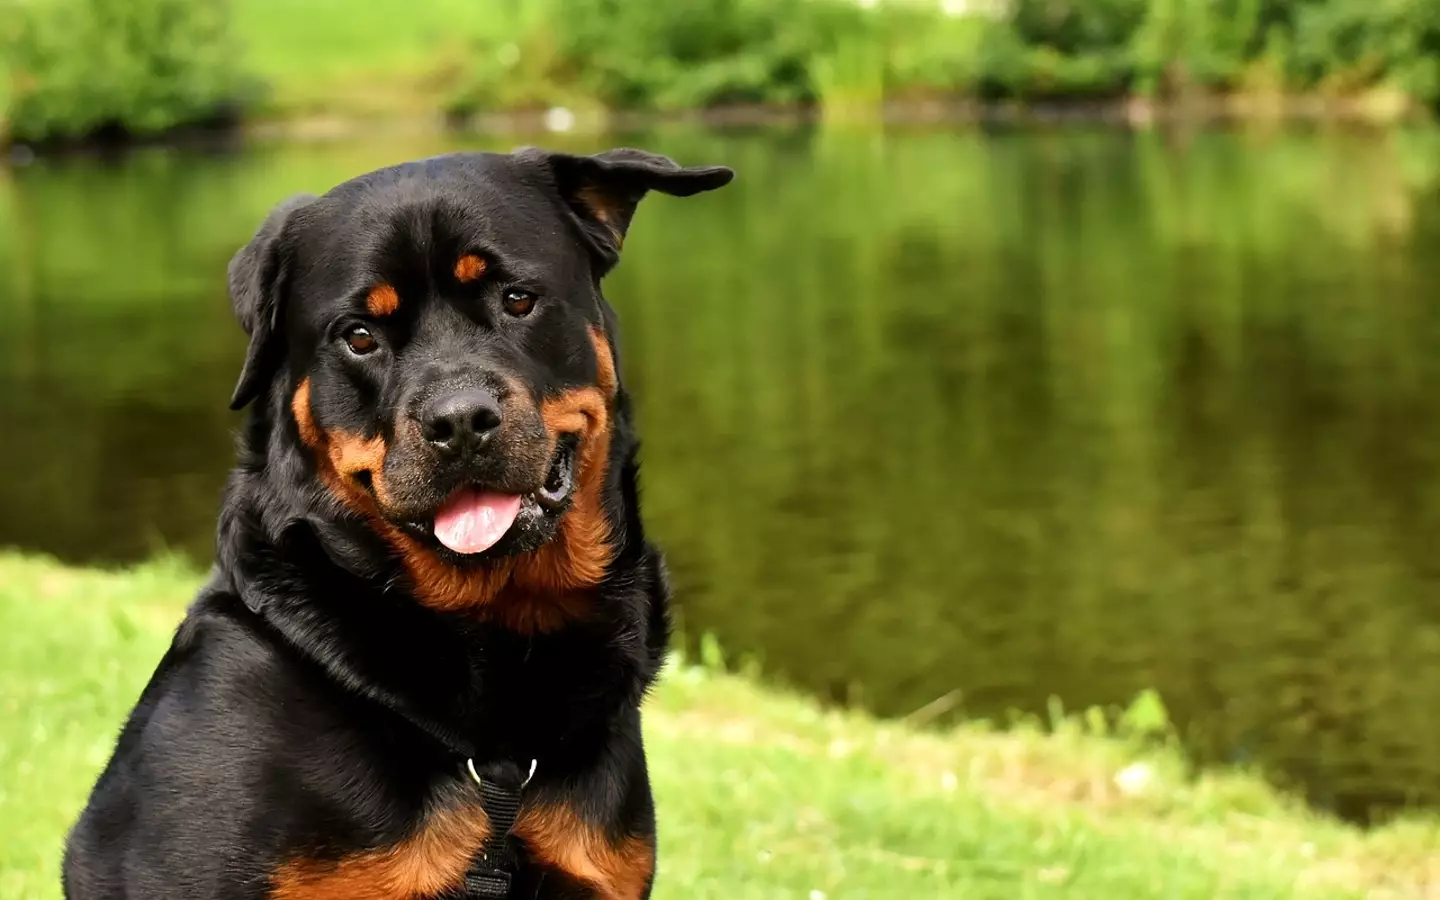 The mum indicated the Rottweiler was good with children.